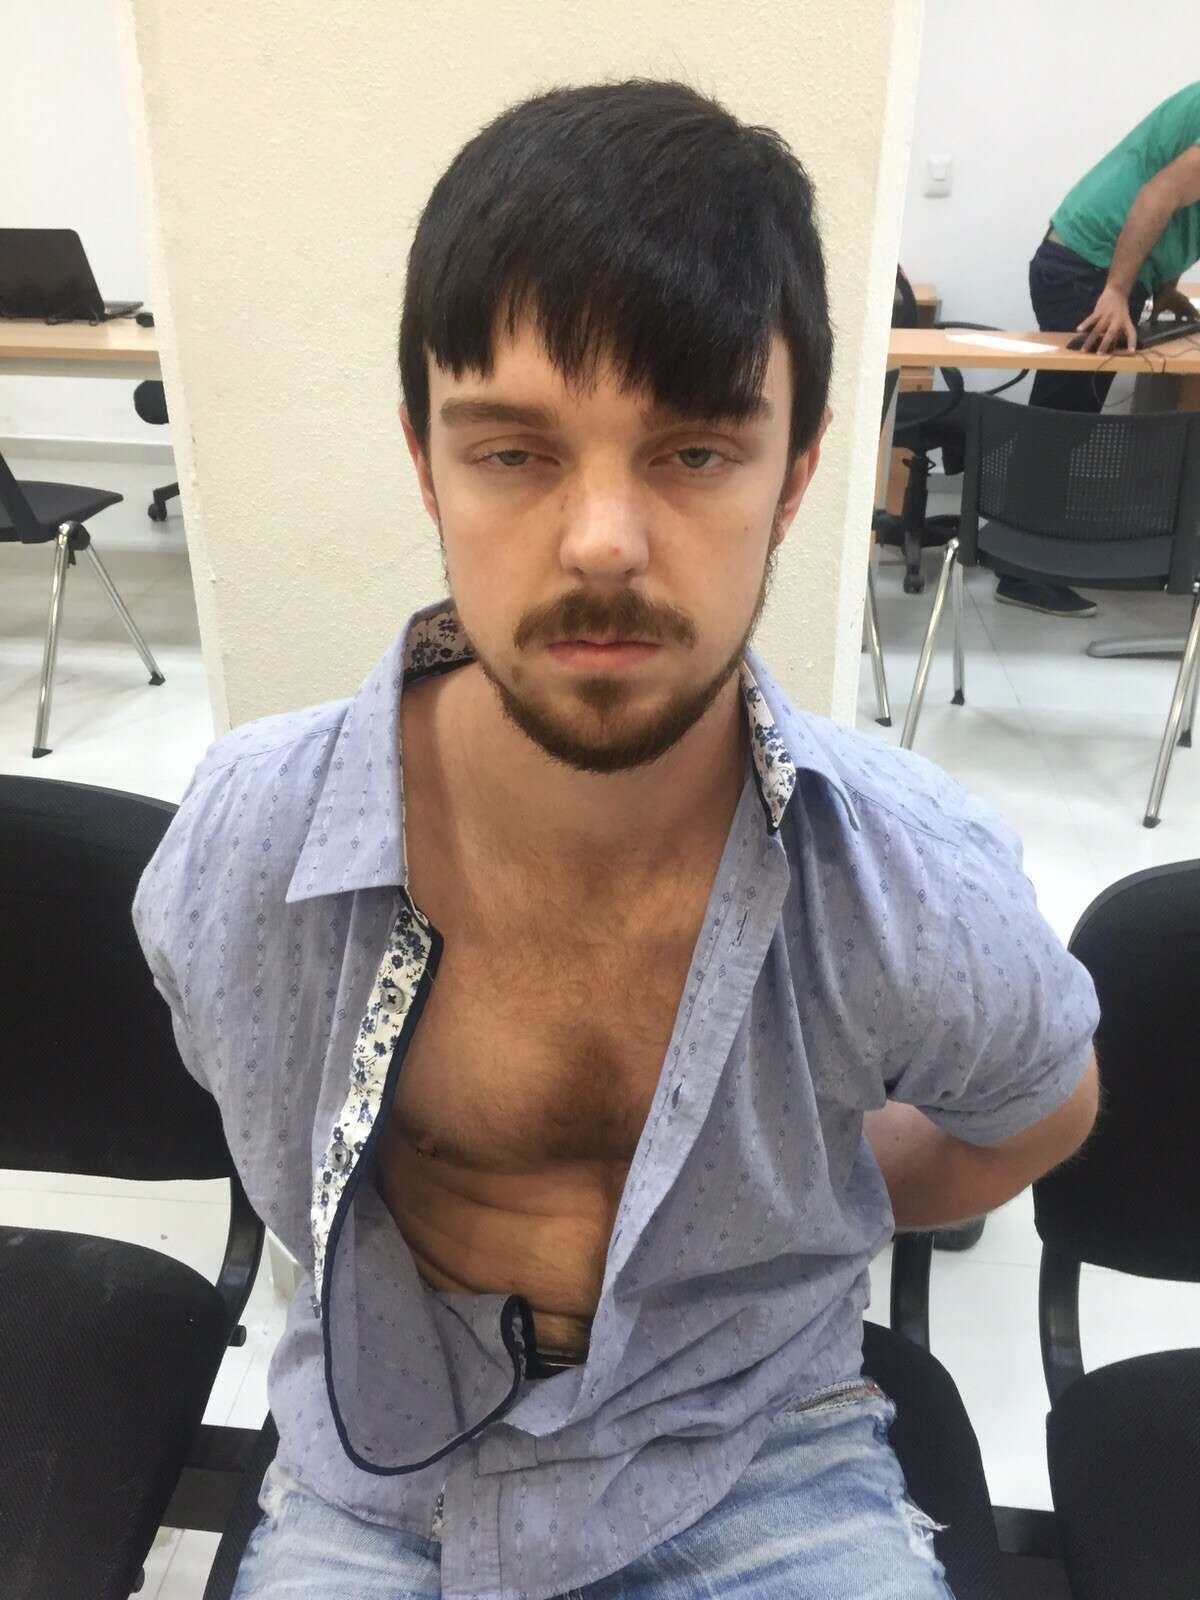 This Dec. 28, 2015 photo released by Mexico's Jalisco state prosecutor’s office shows who authorities identify as Ethan Couch, after he was taken into custody in Puerto Vallarta, Mexico. U.S. authorities said the Texas teenager serving probation for killing four people in a drunken-driving wreck after invoking an "affluenza" defense, was in custody in Mexico, weeks after he and his mother disappeared. (Mexico's Jalisco state prosecutor’s office via AP)